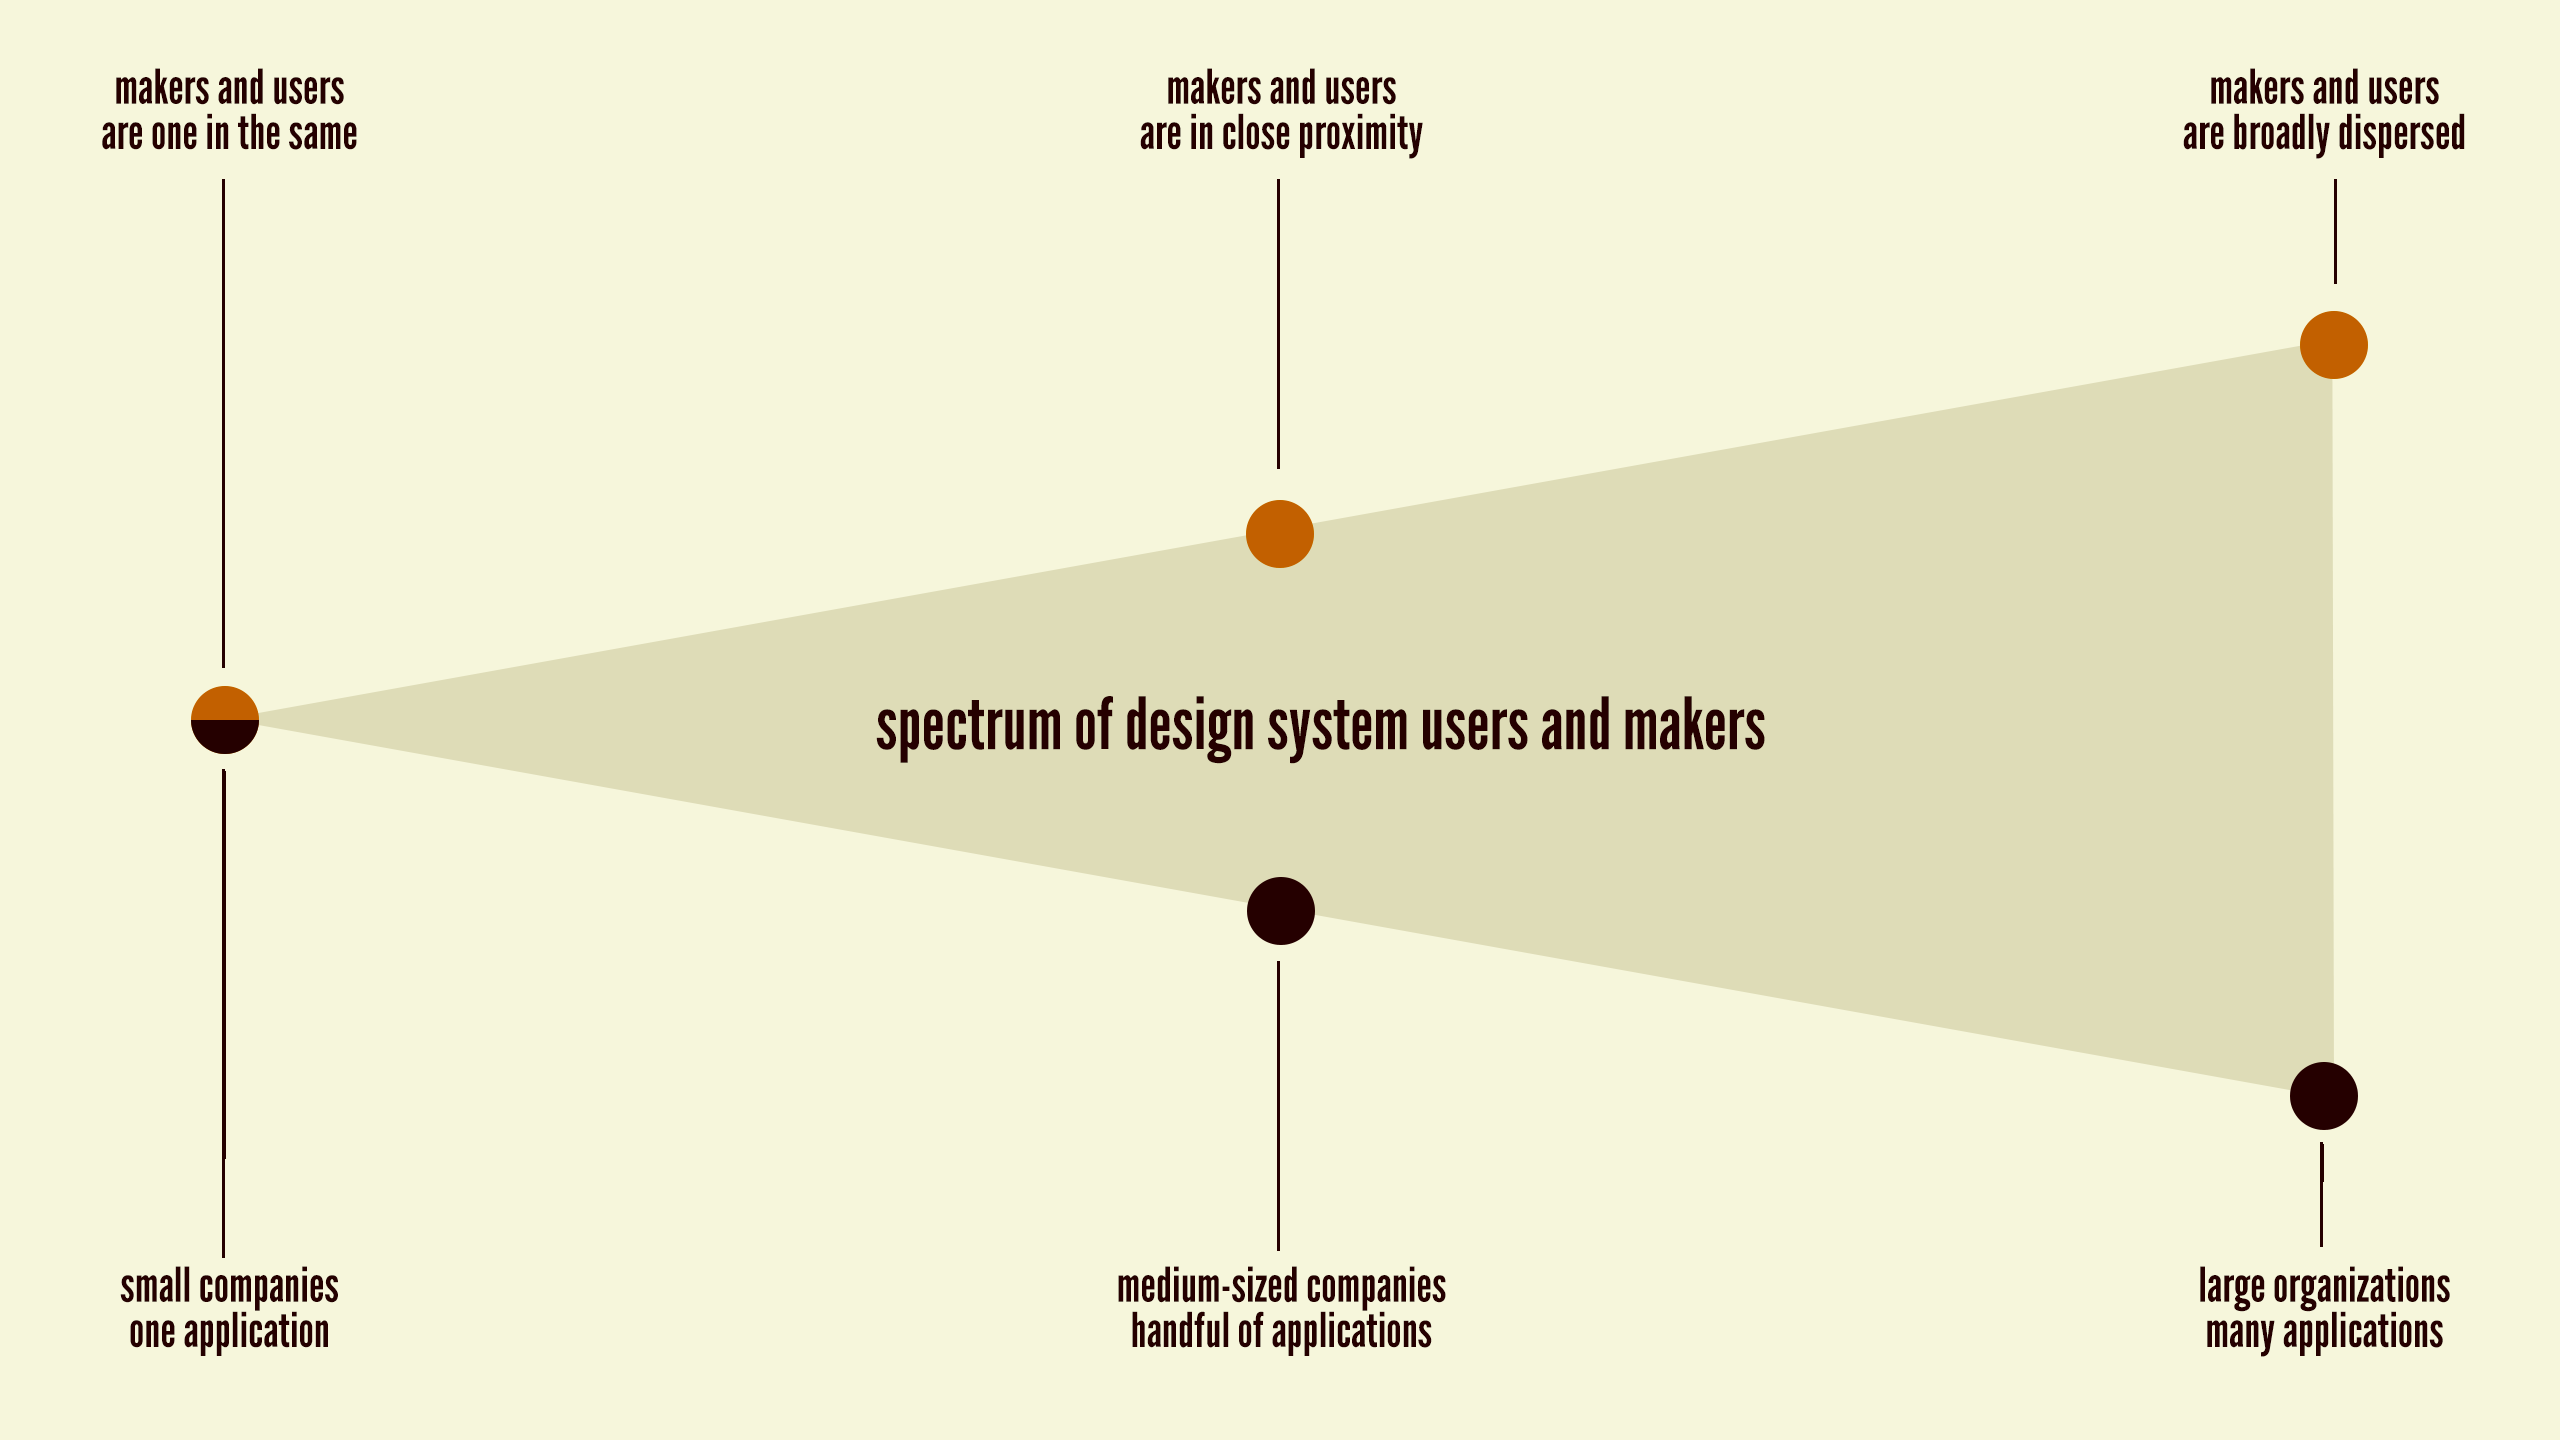 There is a spectrum of potential relationships between design system users and makers, and the size and makeup of your company will undoubtedly shape those relationships.